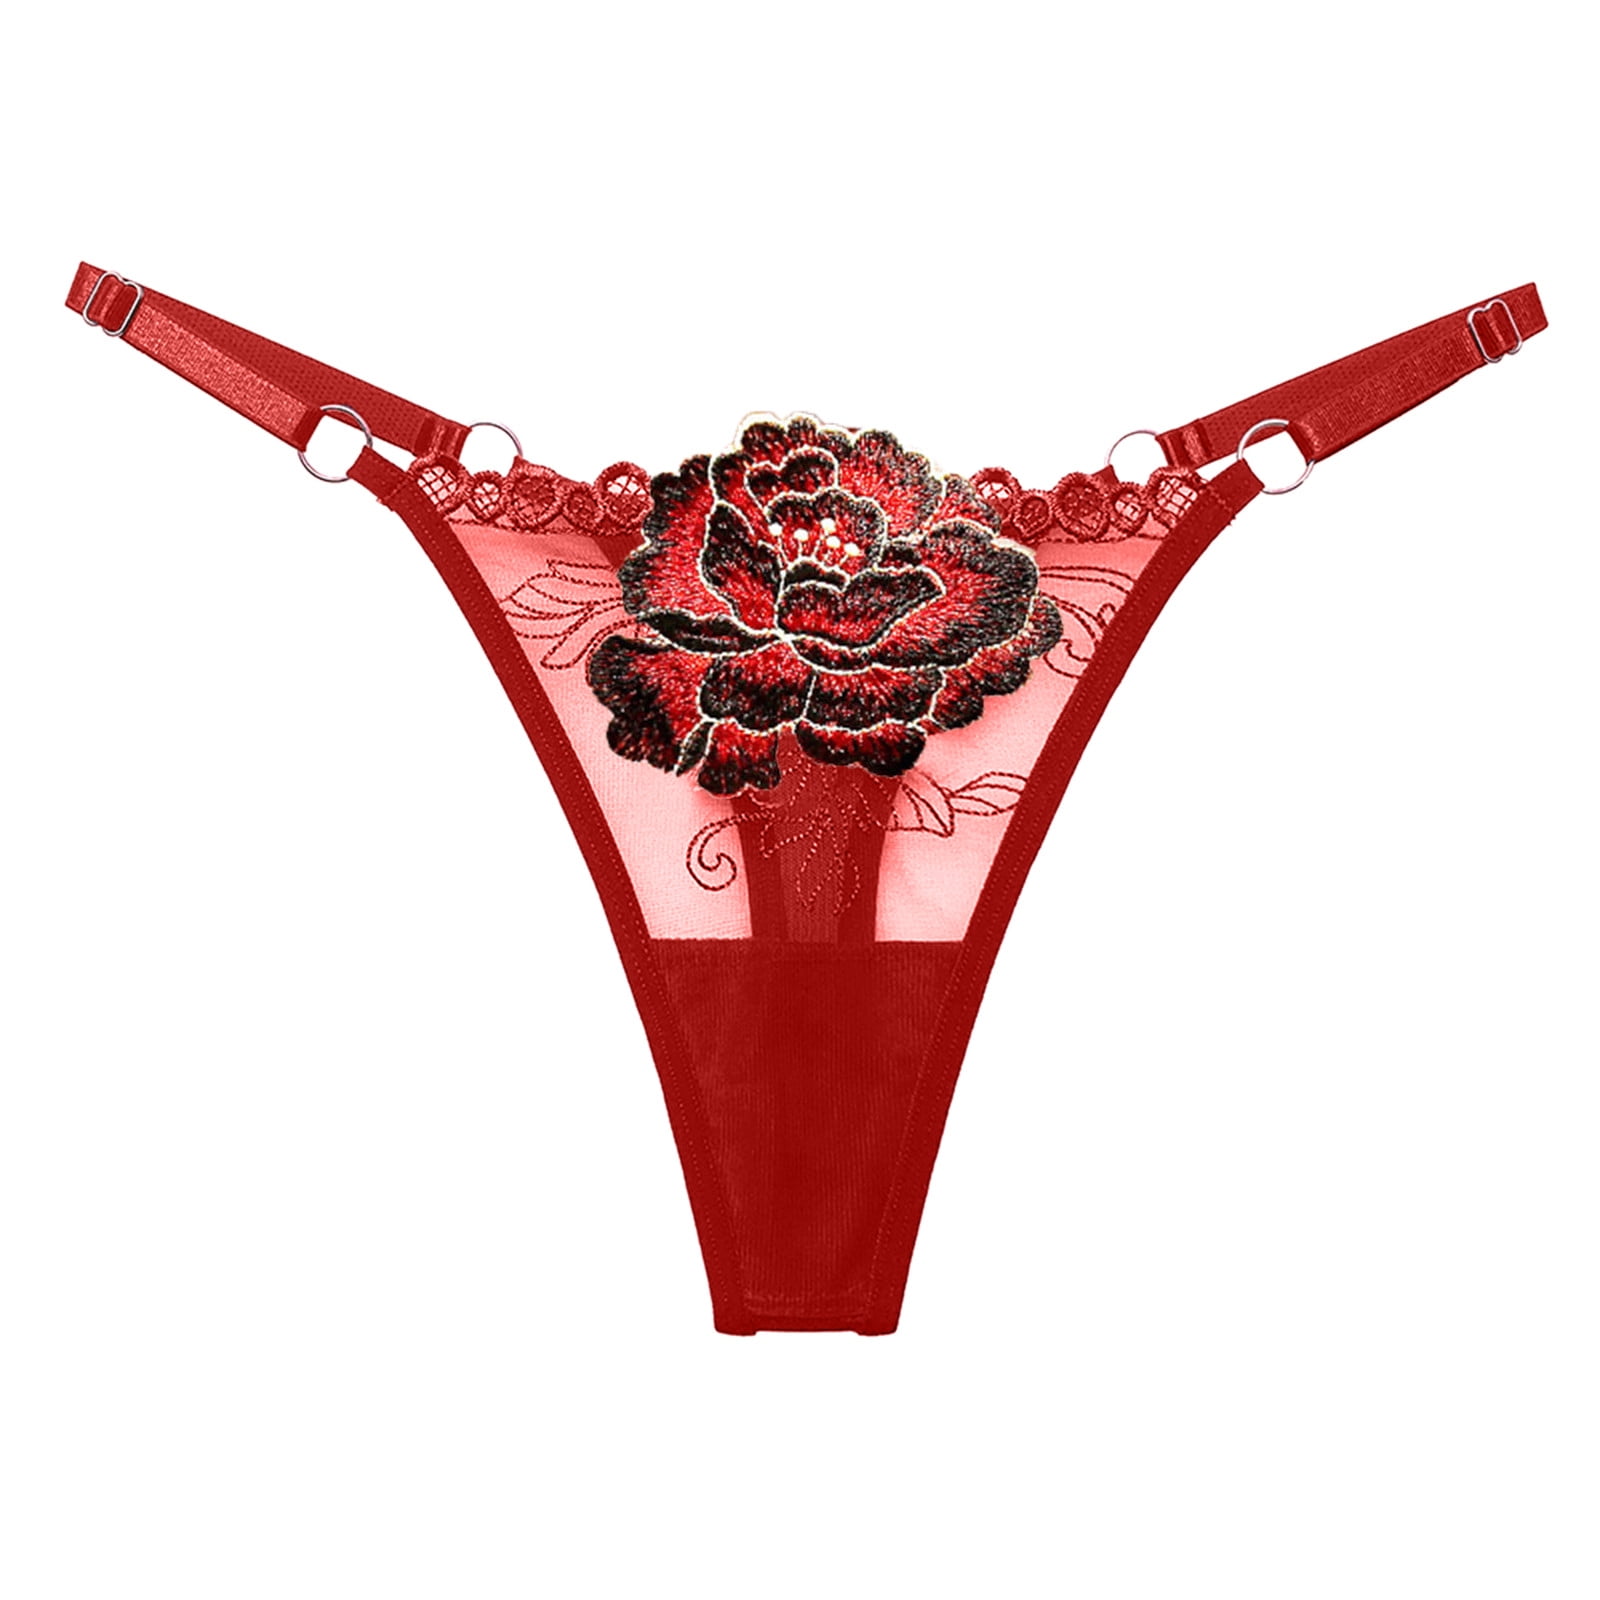 CBGELRT Underwear Women Floral Lace Thong Women Bowknot Low Waist Panties  Hollow Out Transparent Underwear Briefs Panty Seamless Lingerie Red One Size